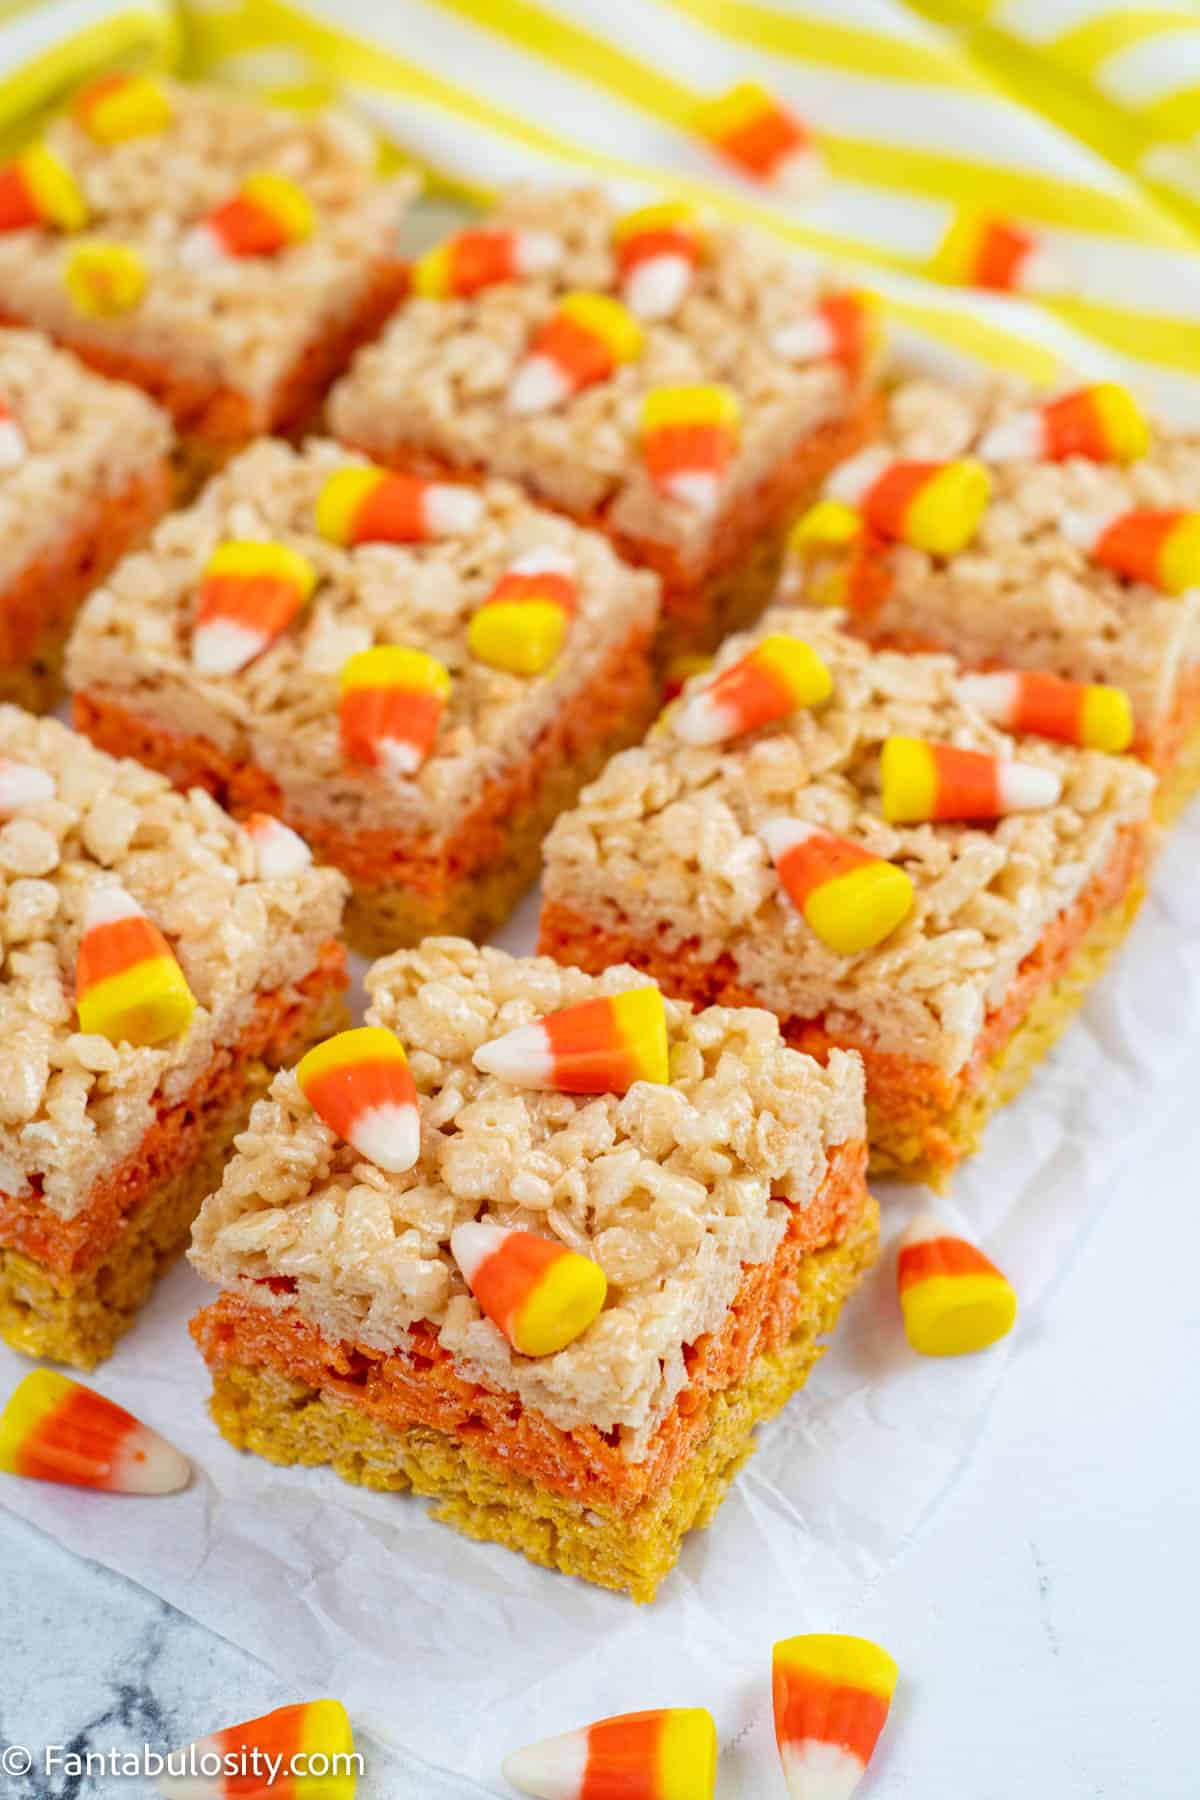 Squares of candy corn rice krispie treats are resting on parchment paper and surrounded by scattered candy corn